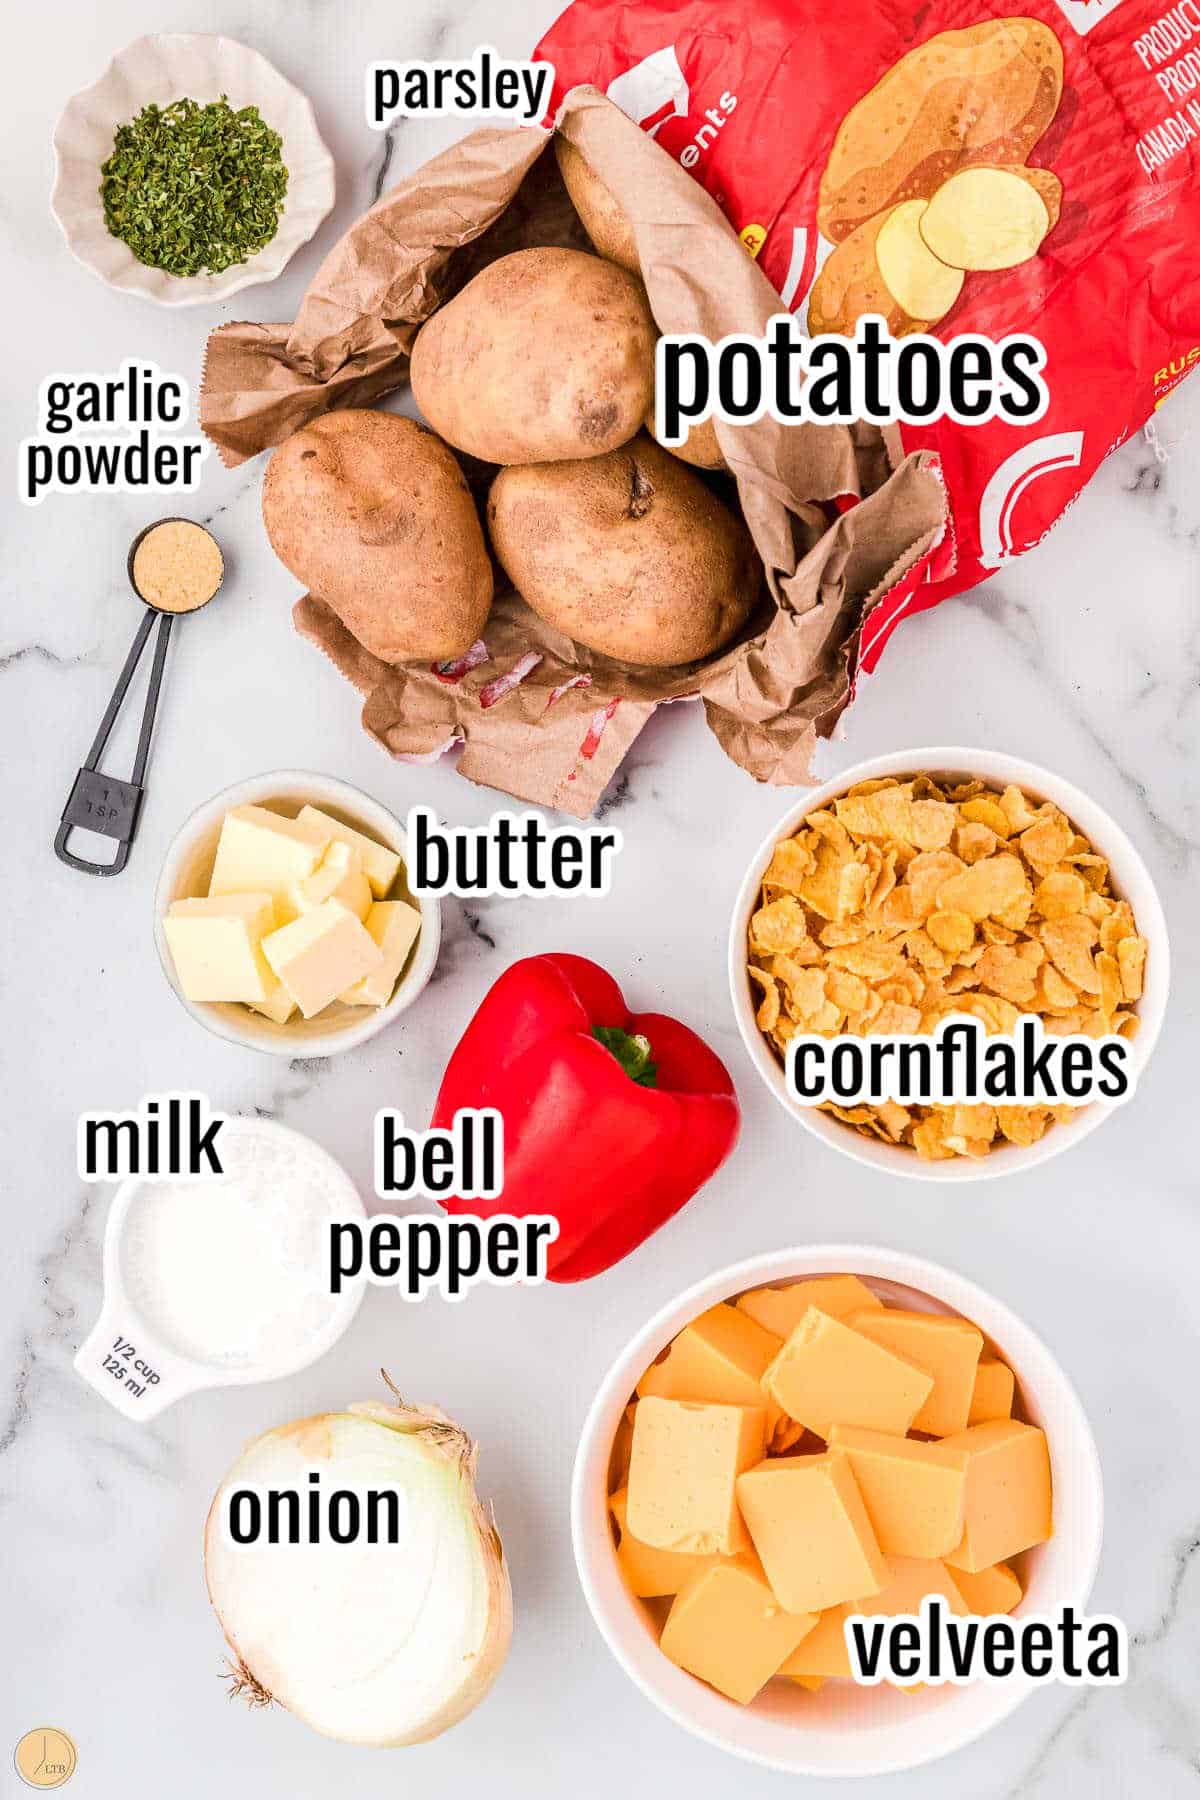 ingredients for cottage potatoes like tablespoons of butter and tablespoons parsley